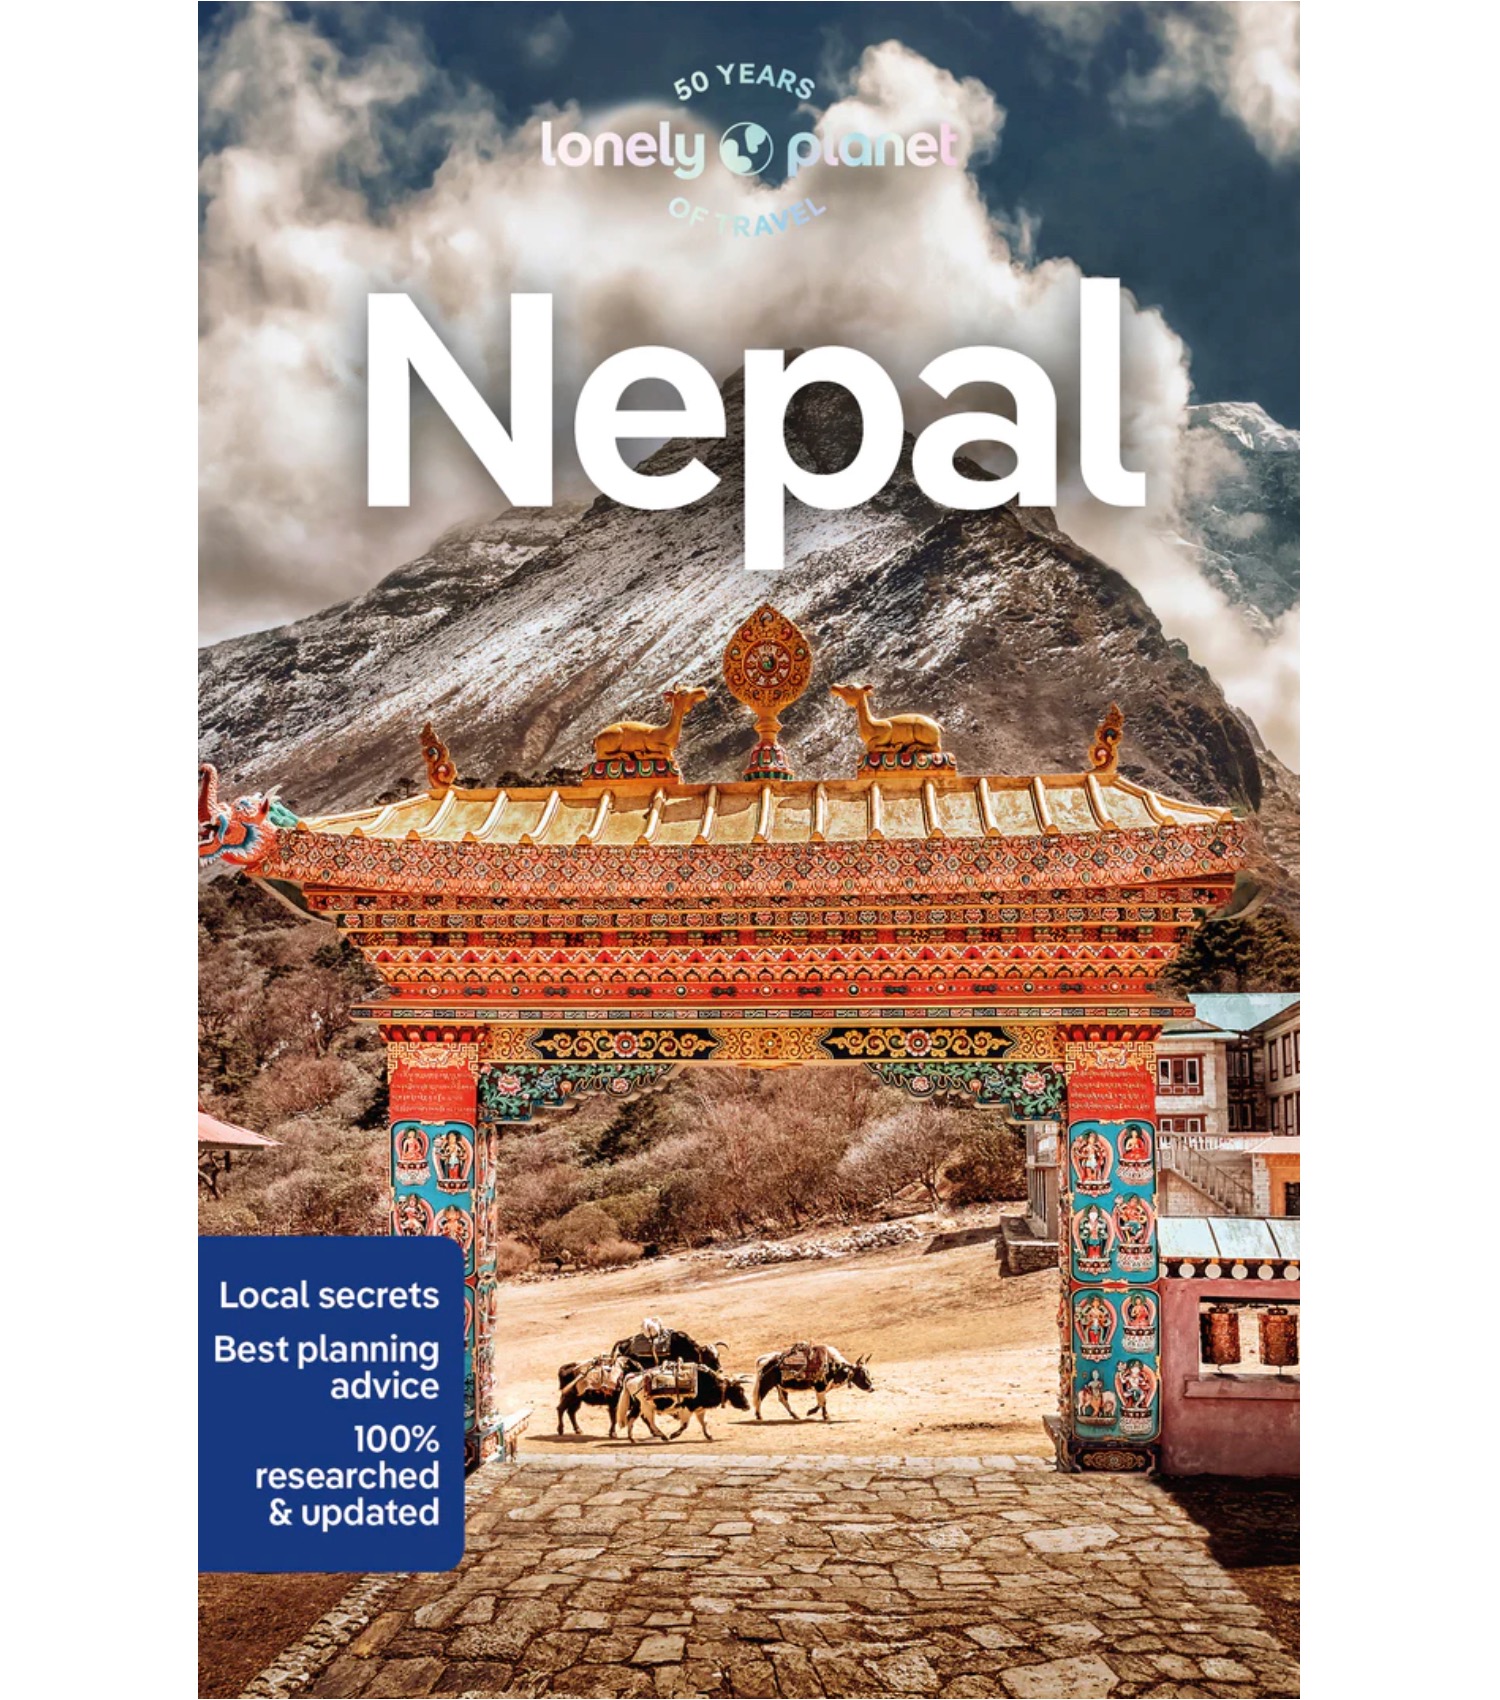 Planet　Lonely　(9781787015975)　Edition　Lonely　12th　Nepal　Planet　by